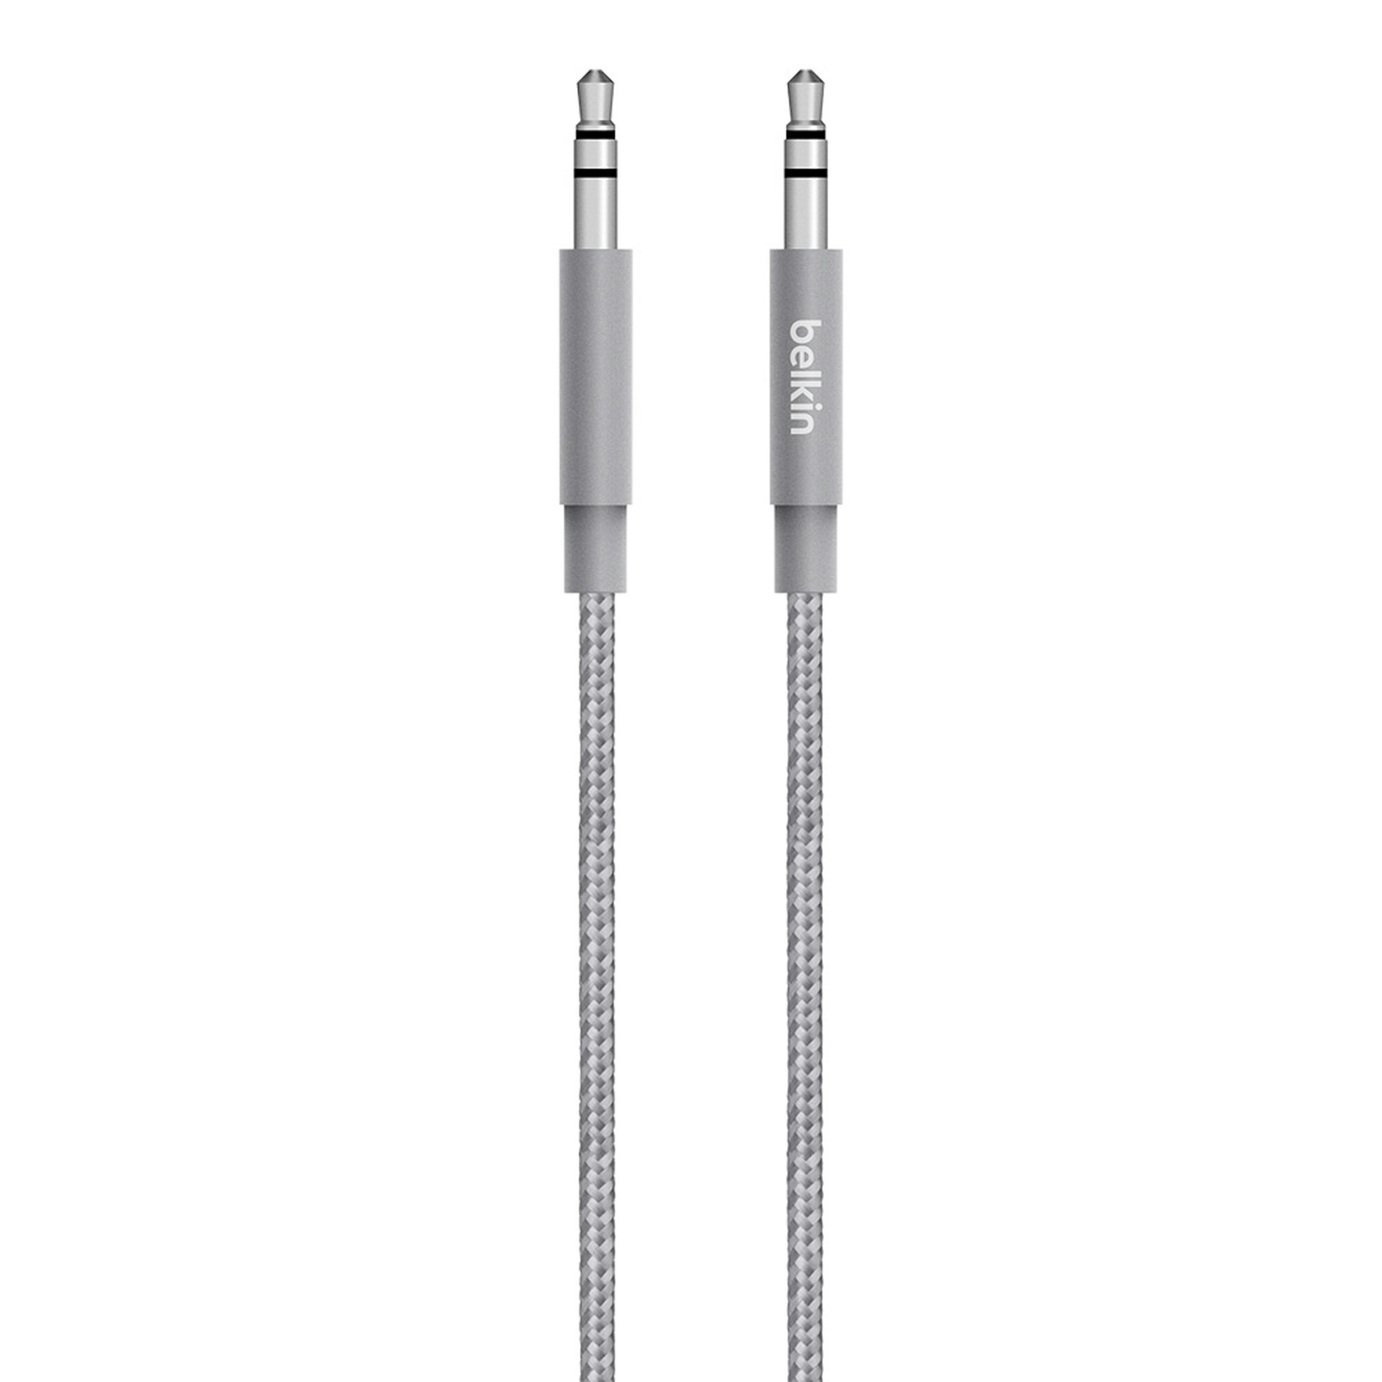 Belkin 3.5mm Premium Braided AUX Cable Review